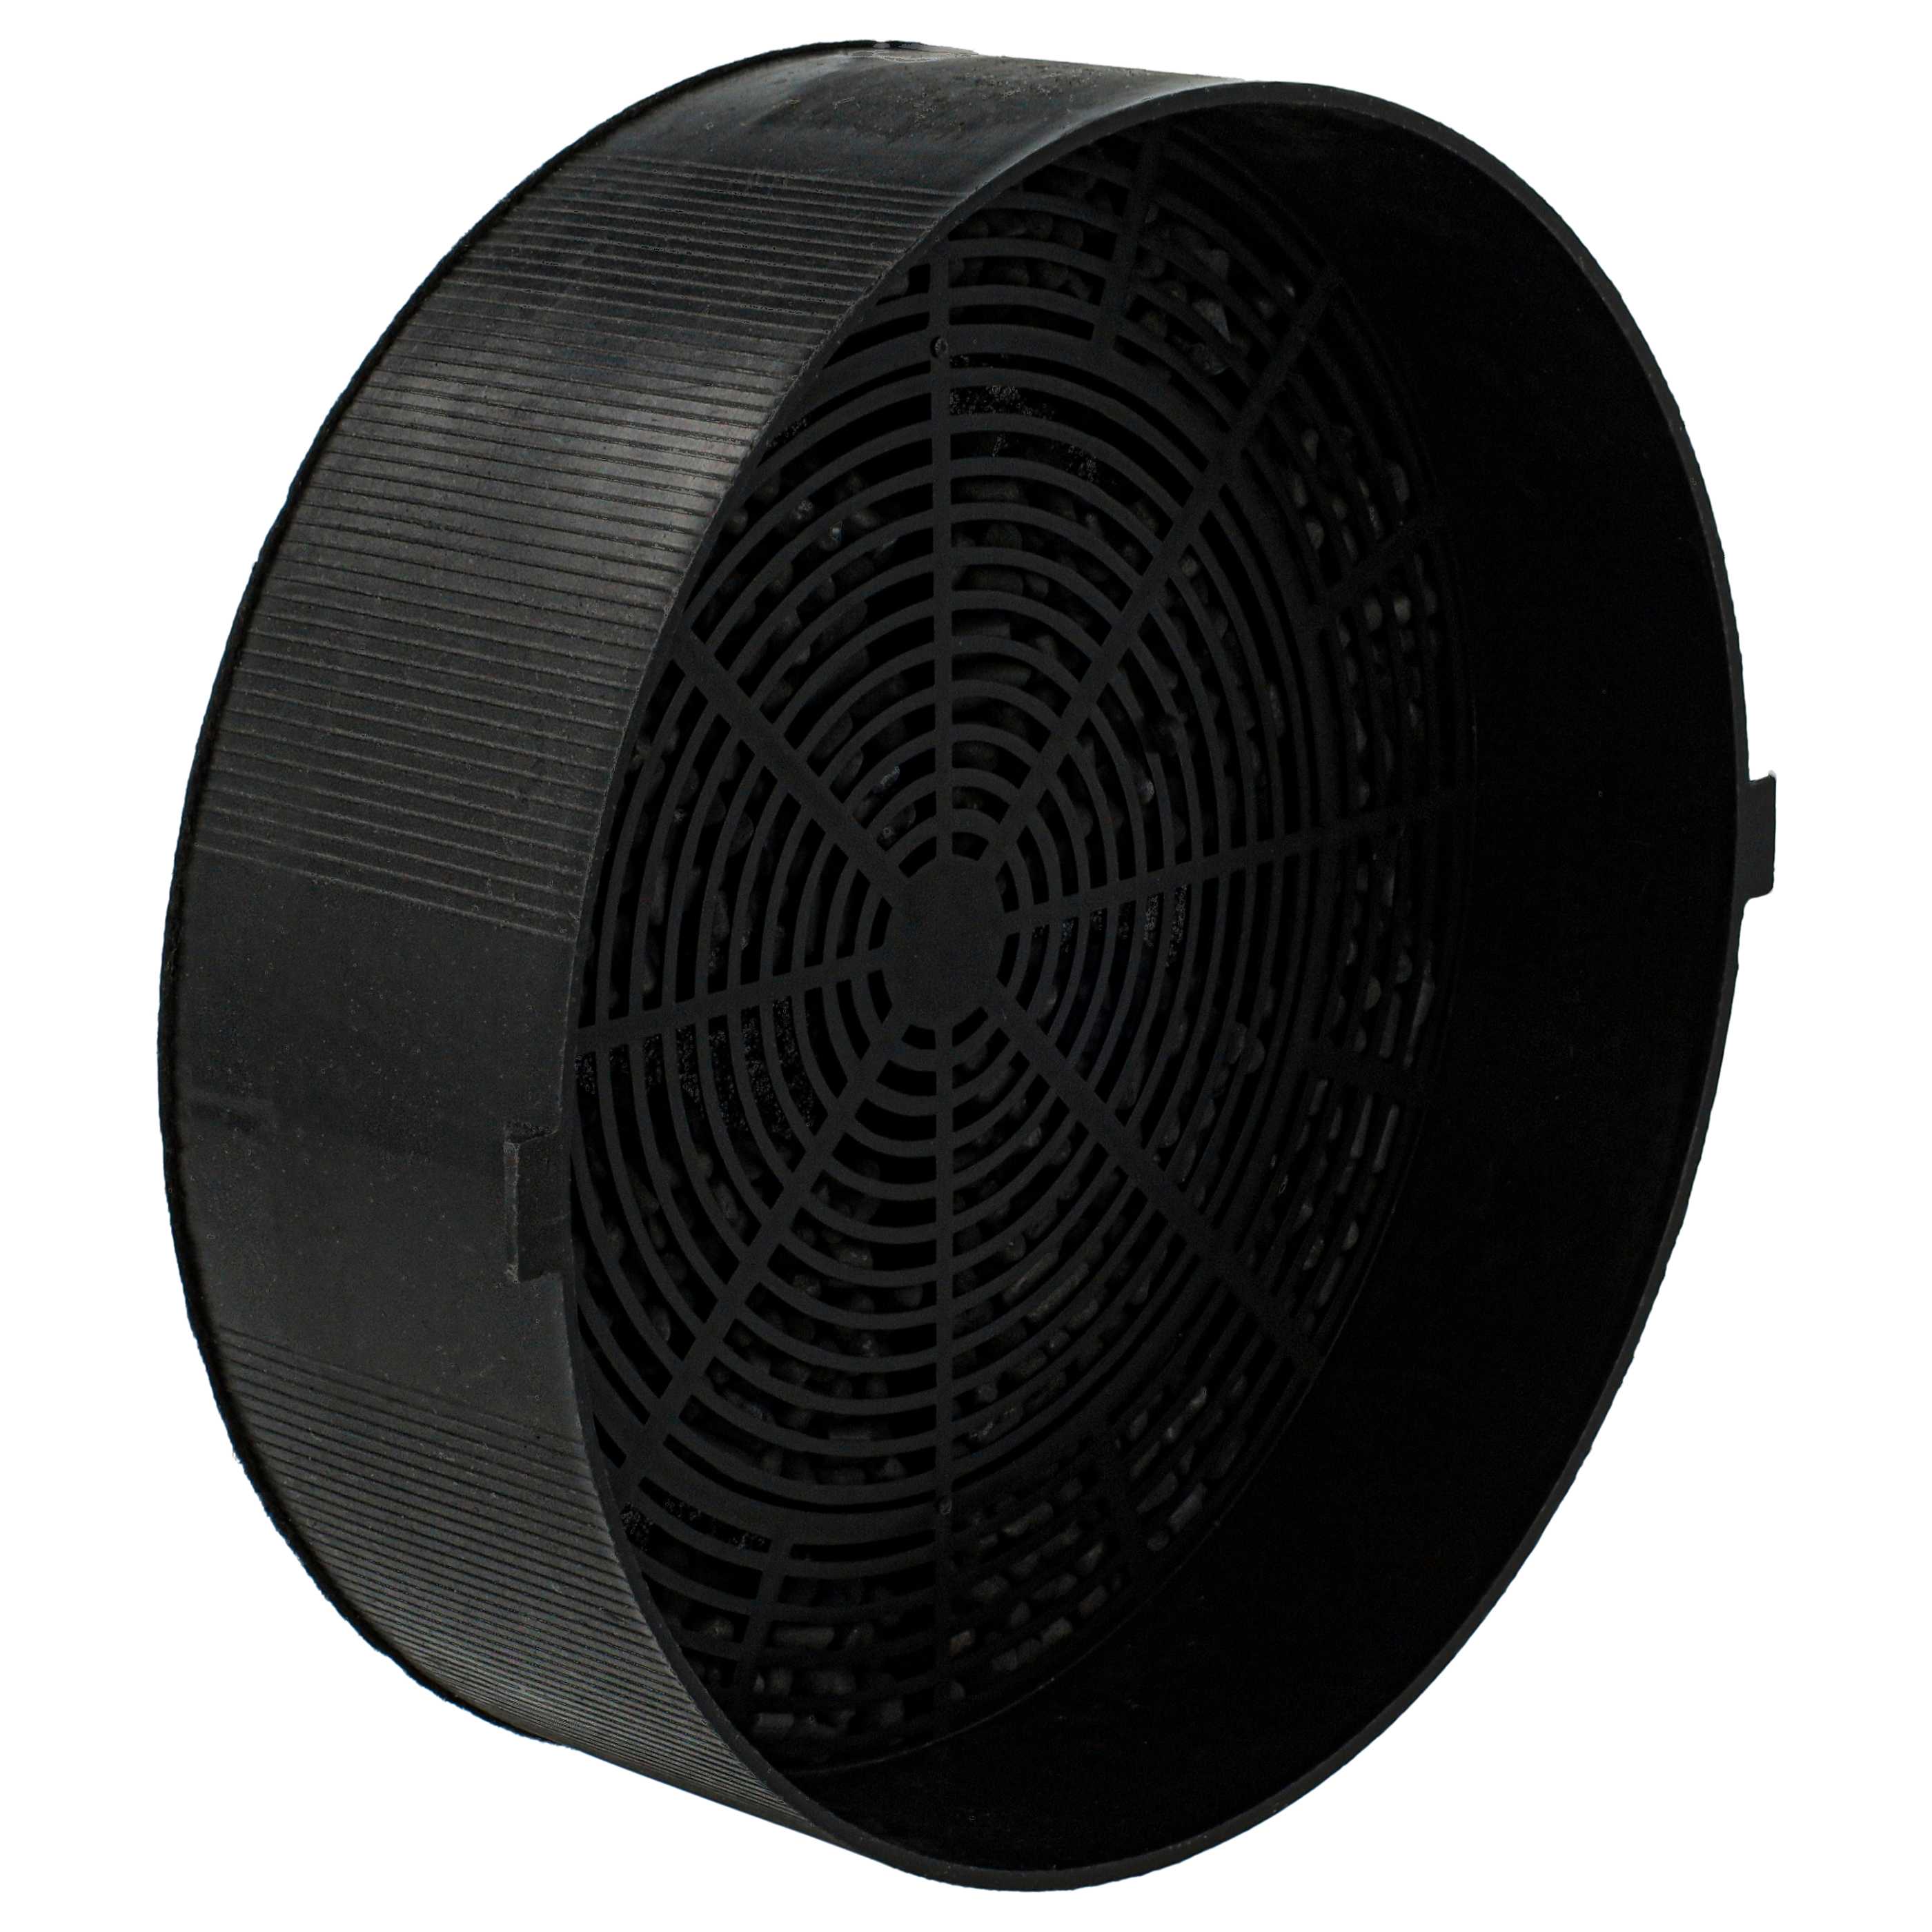 Activated Carbon Filter Suitable for GZD1125 Alno Hob etc. - 16 cm